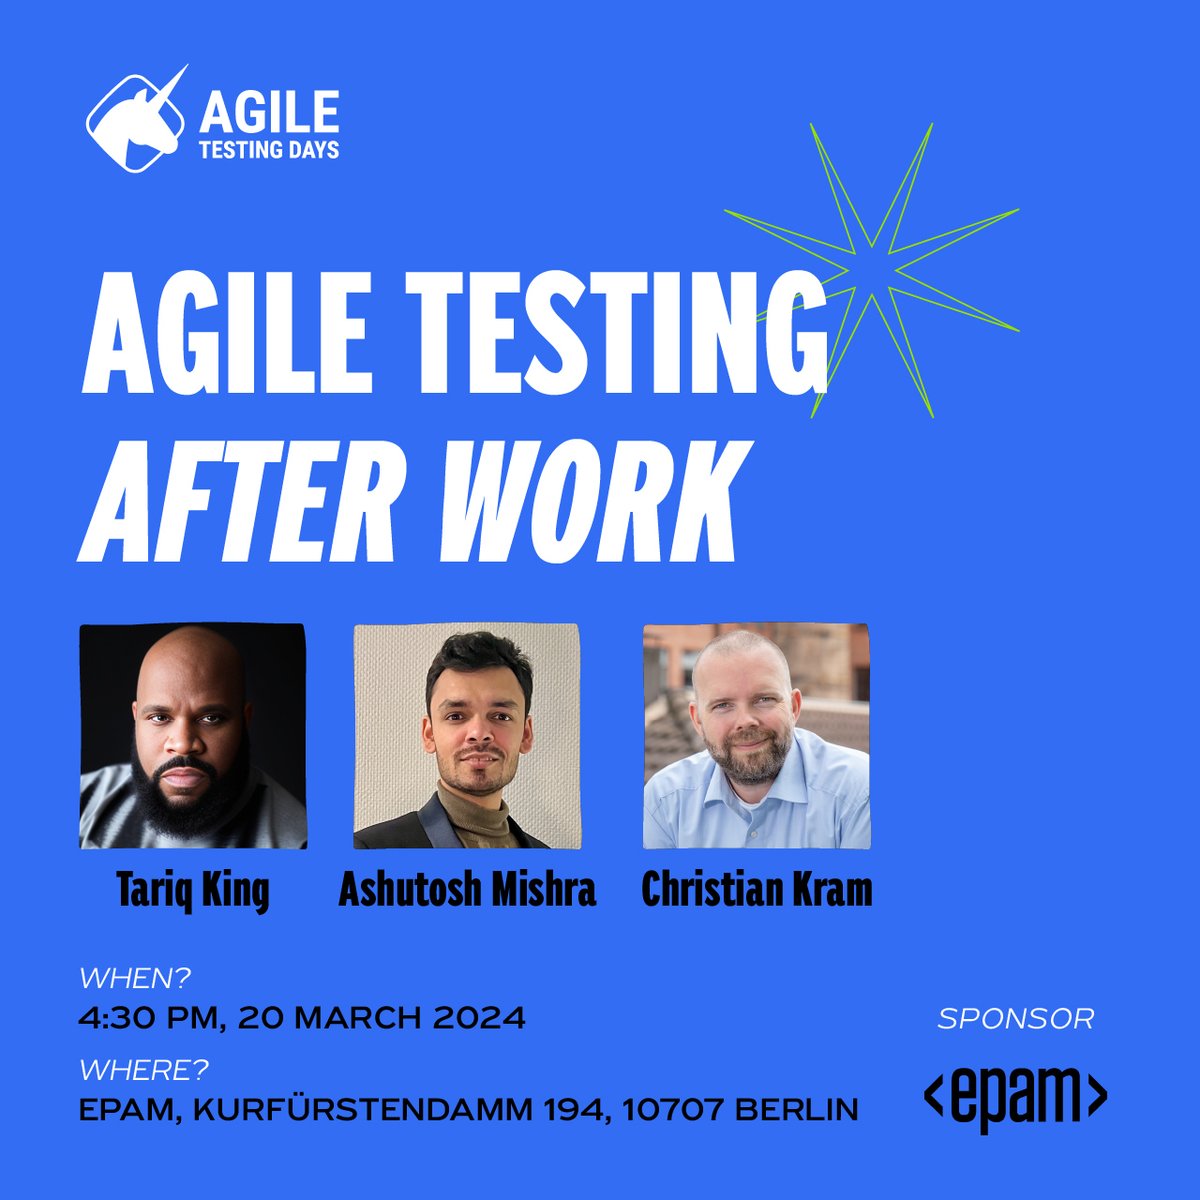 On Wednesday, we will meet again! Join our meetup on March 20, 4:30 PM, at the @EPAMSystems office in Berlin. @tariq_king and Ashutosh Mishra will discuss #AI in software development and #testing and Chrstian about questioning techniques Sign up: meetup.com/agile-nights-b…